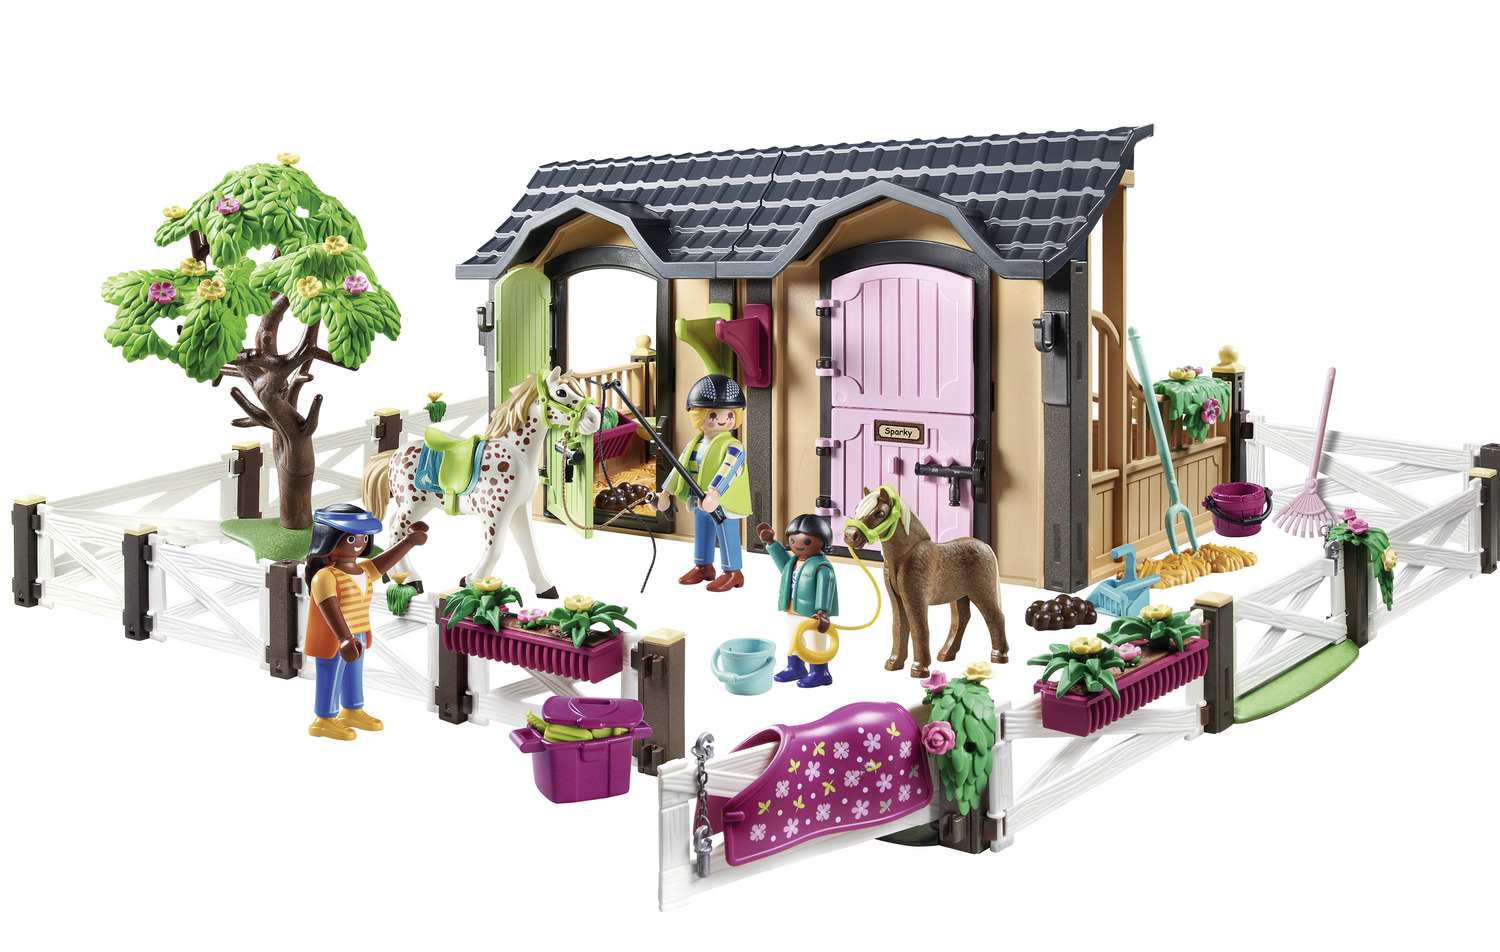 Playmobil Country Μαθήματα Ιππασίας  70995 - Playmobil, Playmobil Country